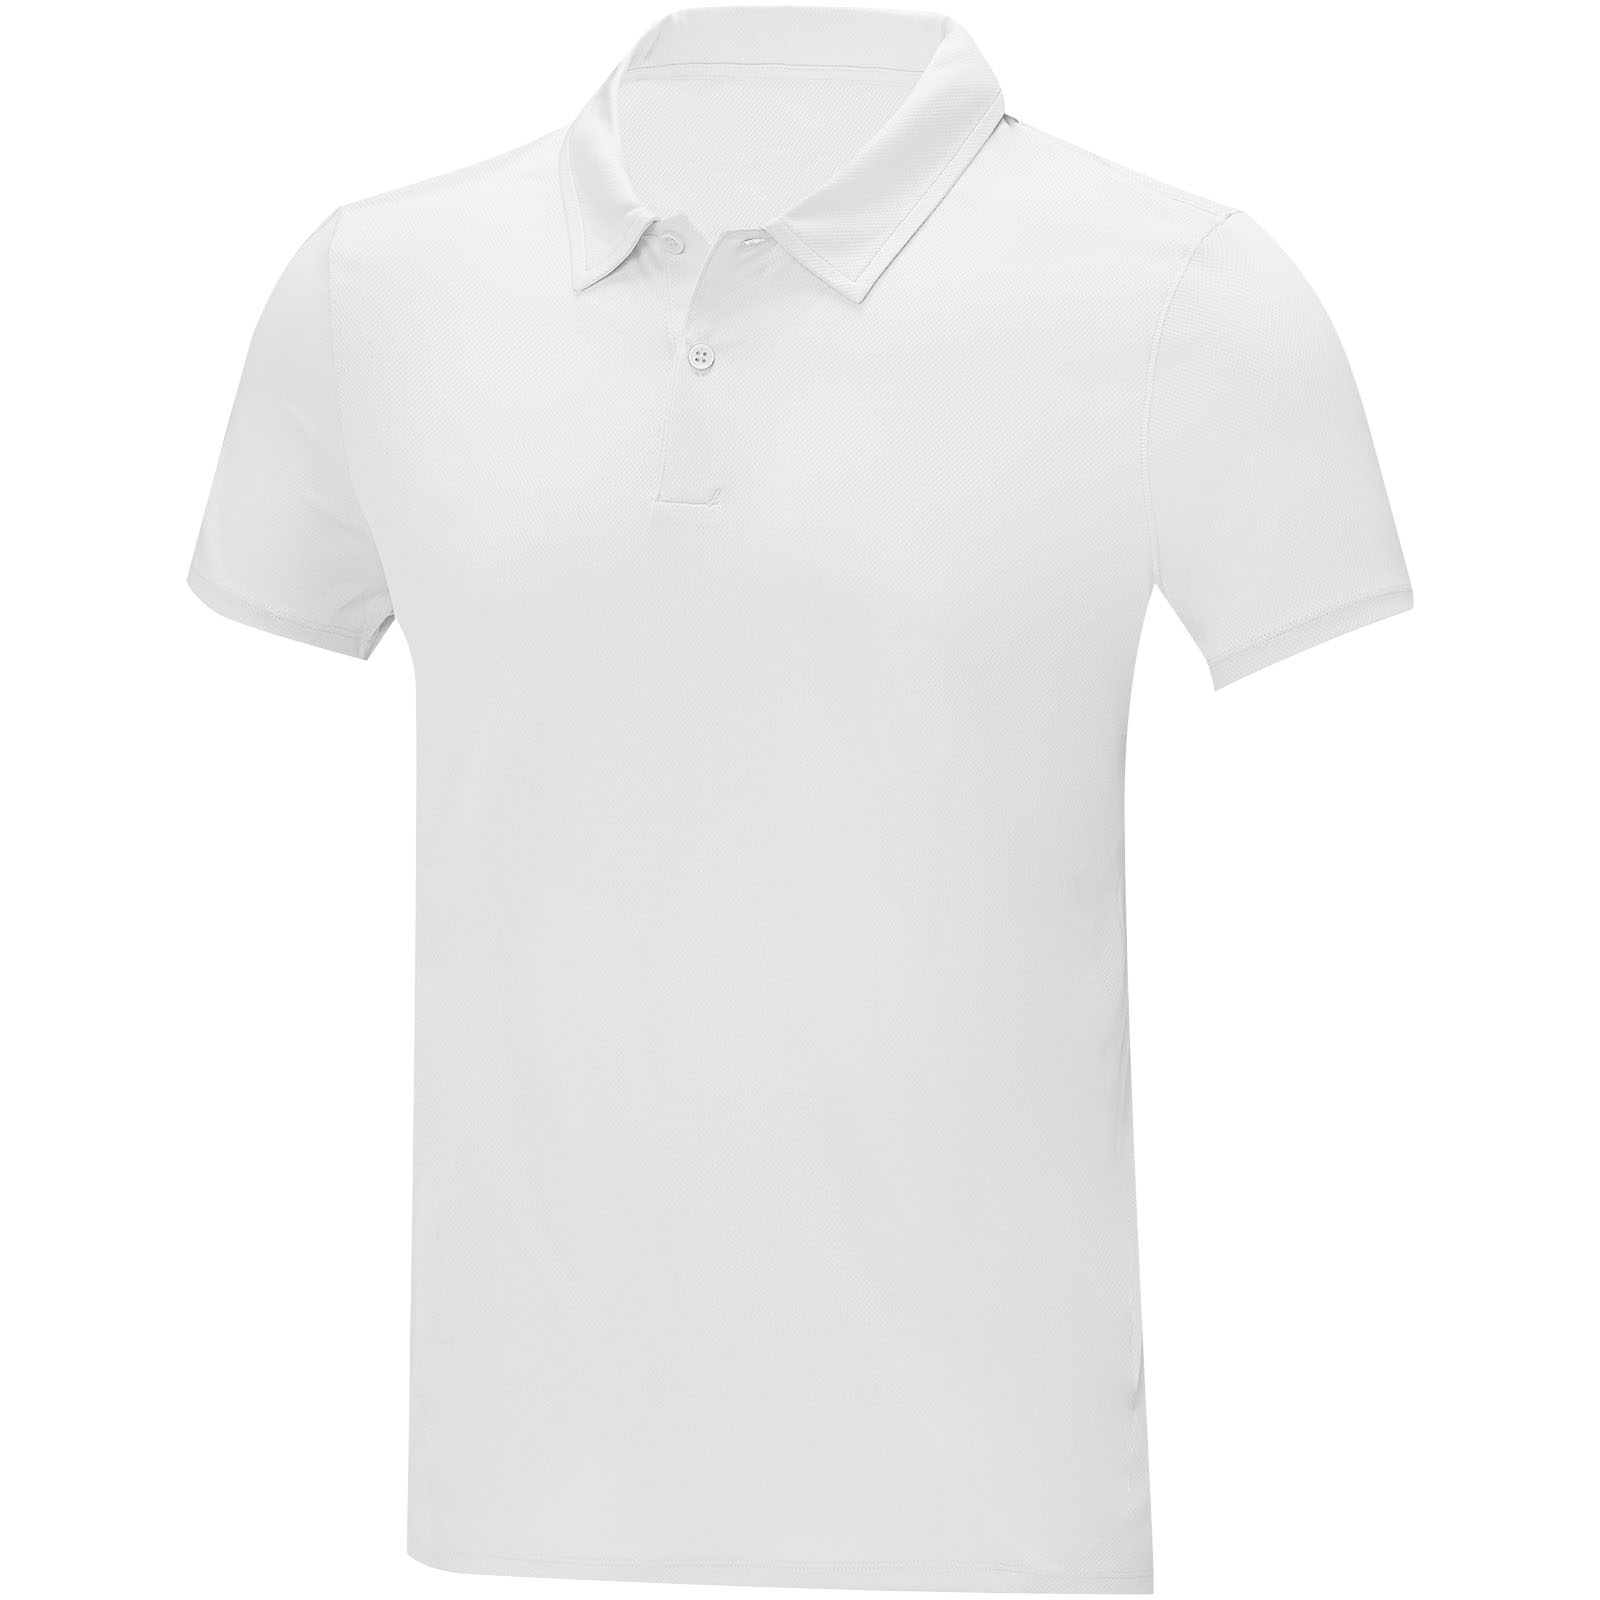 Clothing - Deimos short sleeve men's cool fit polo